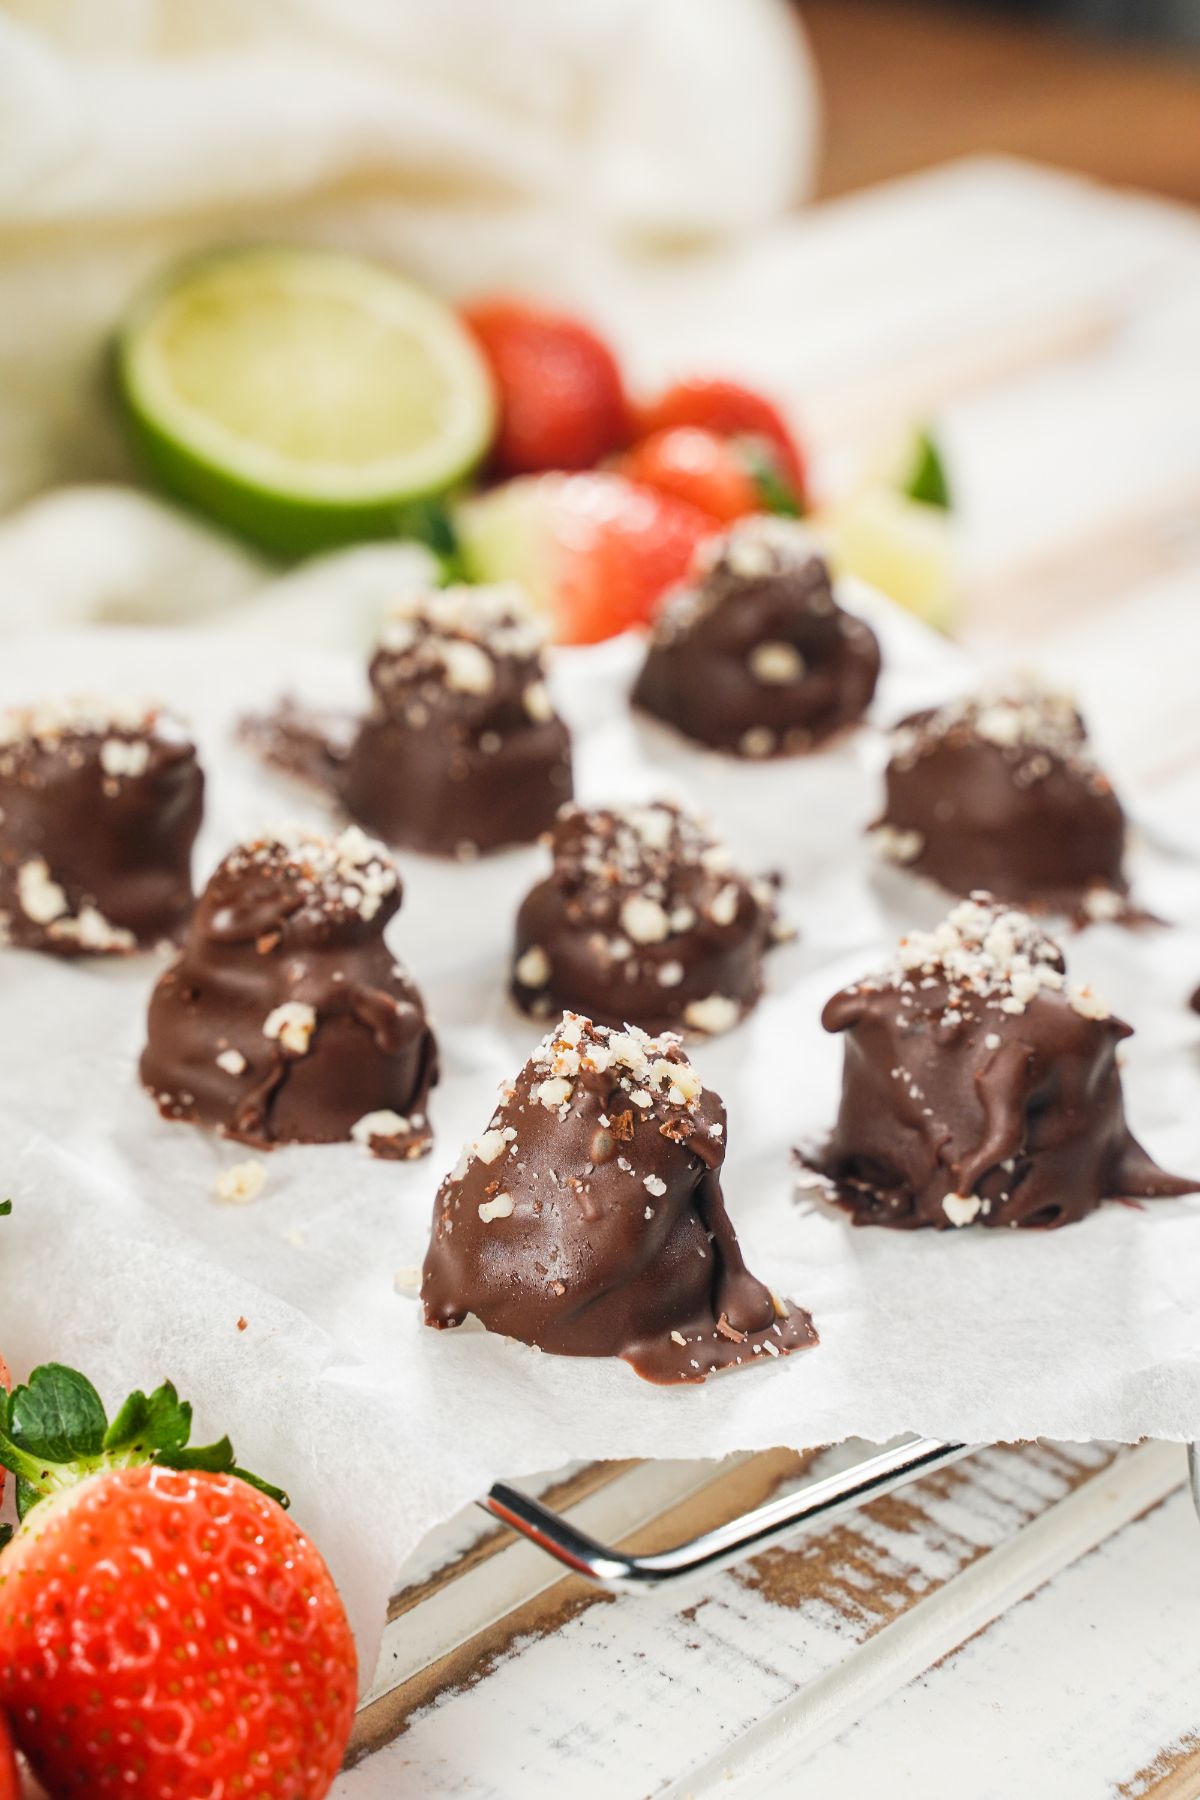 No-Bake Snickers Bites served on a white paper with some fresh fruits